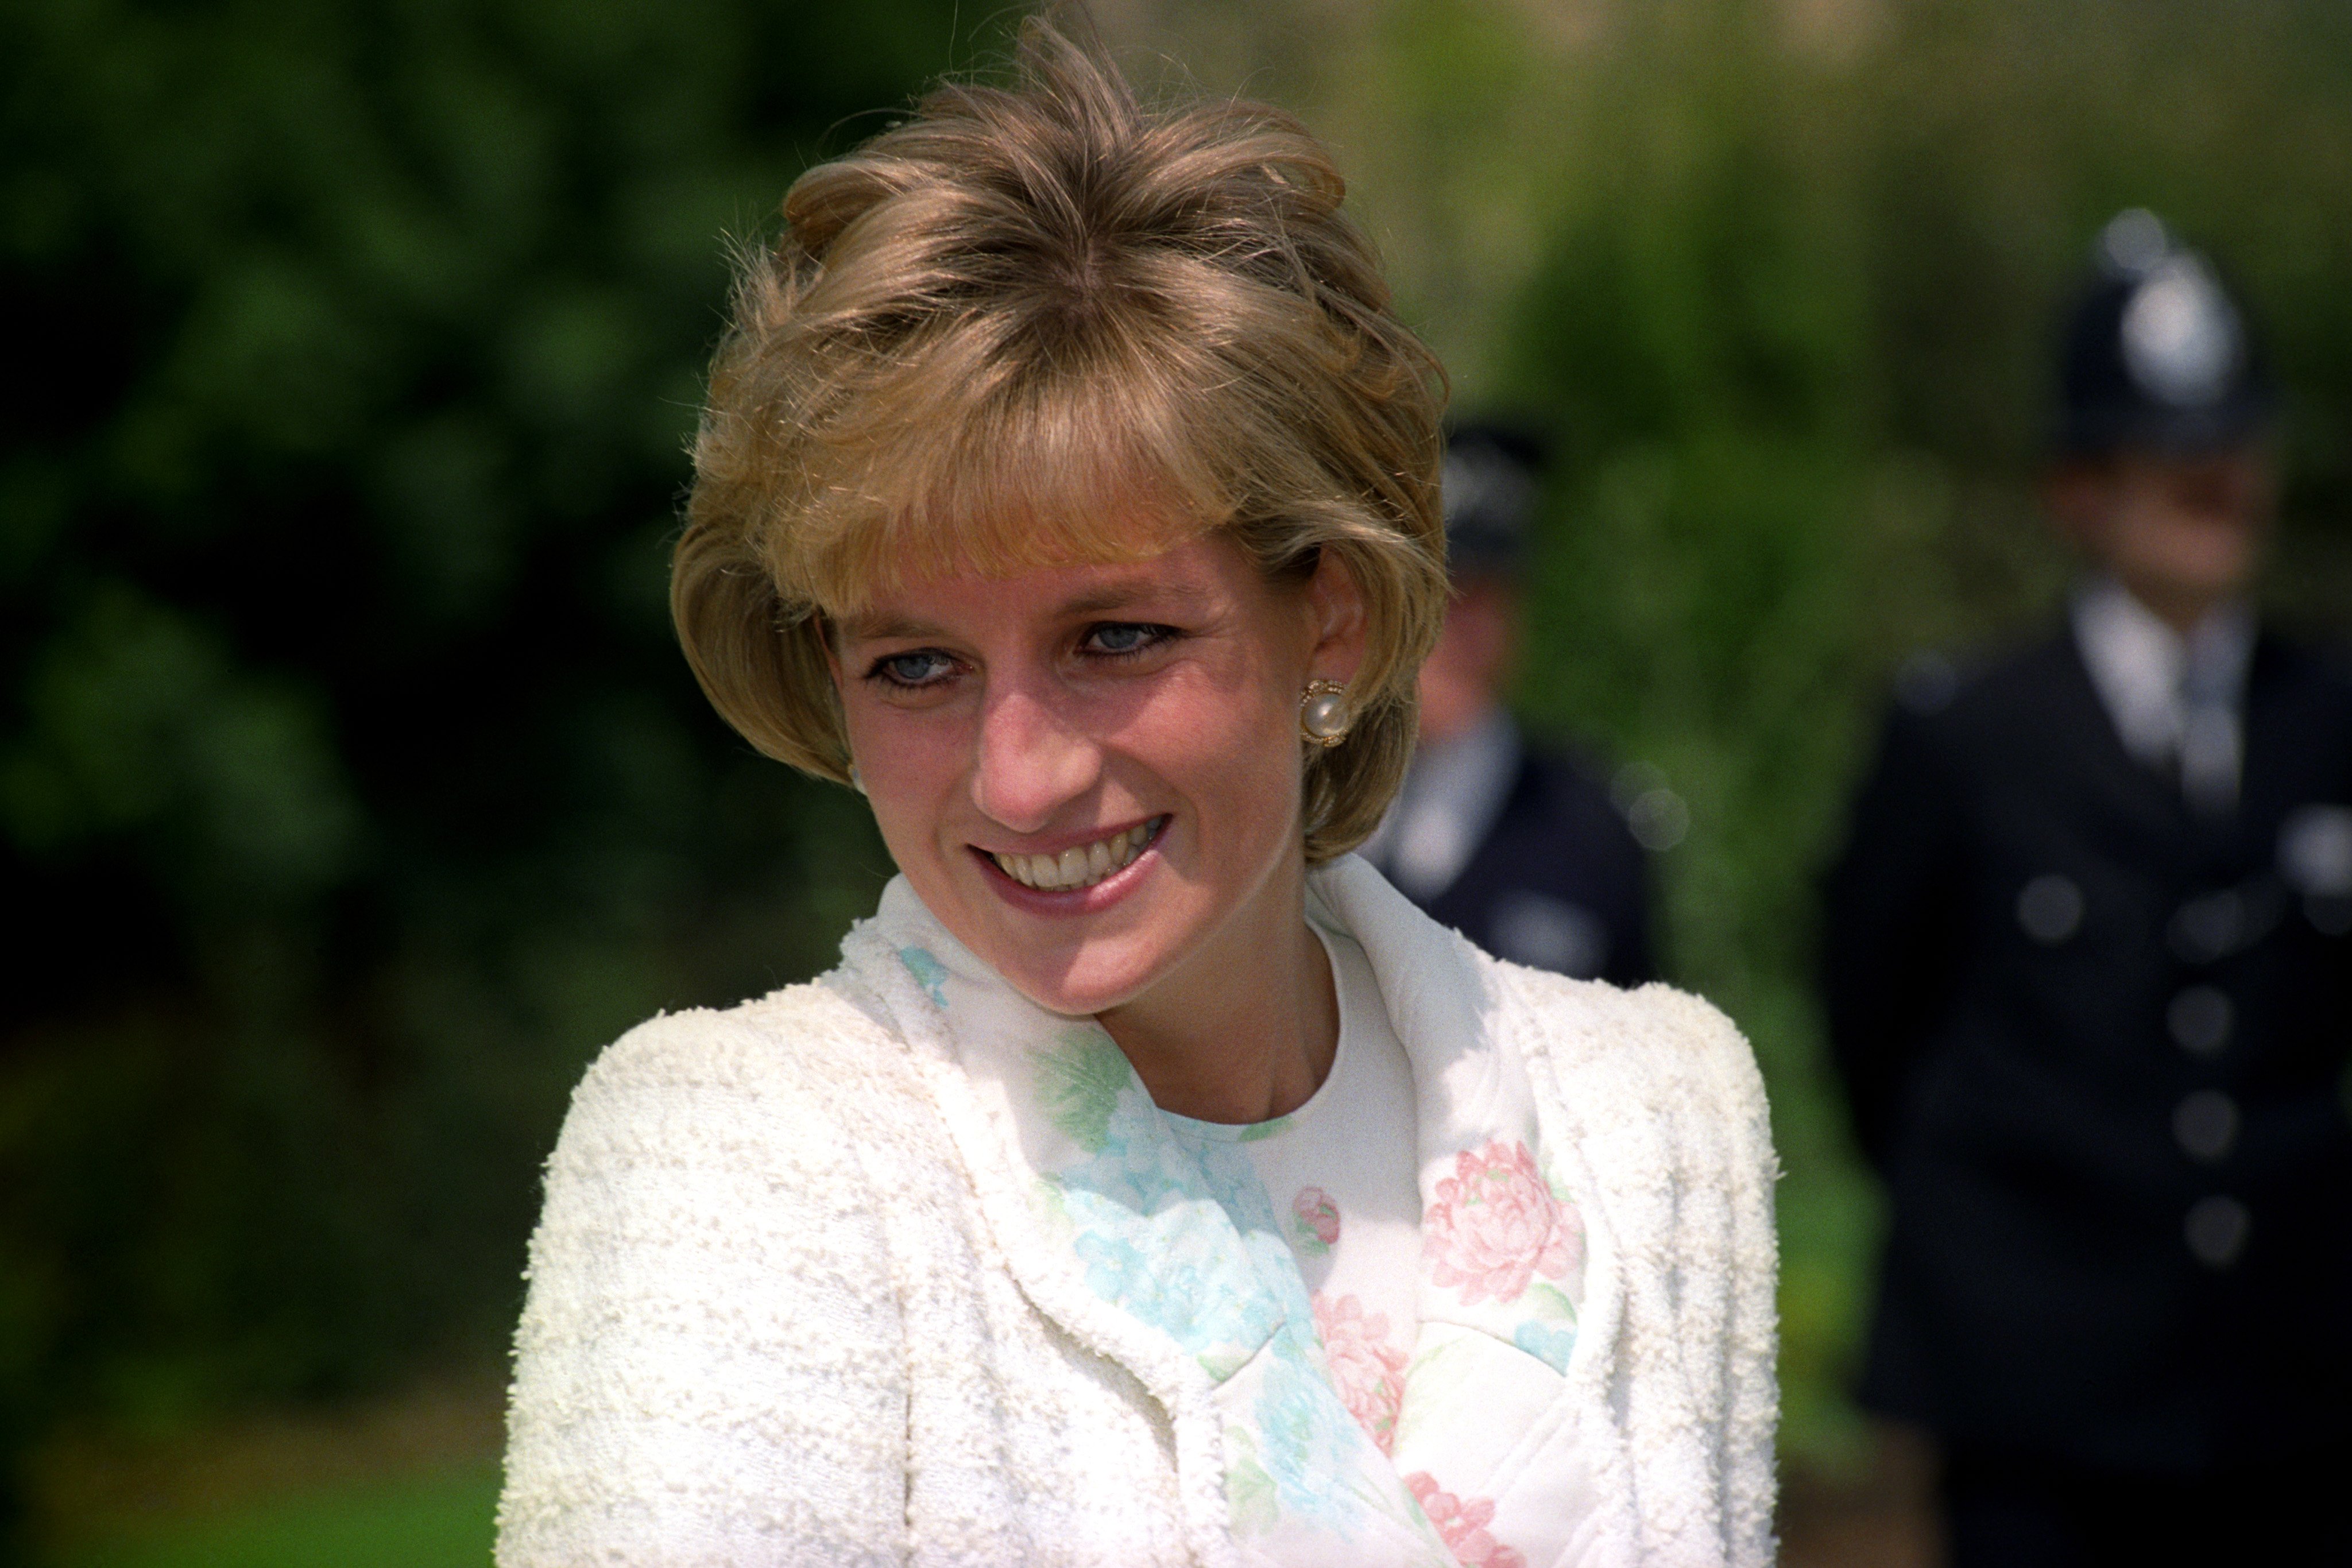 Princess Diana smiling and dressed in a pastel coat and shirt at the International Spinal Research Trust charity event